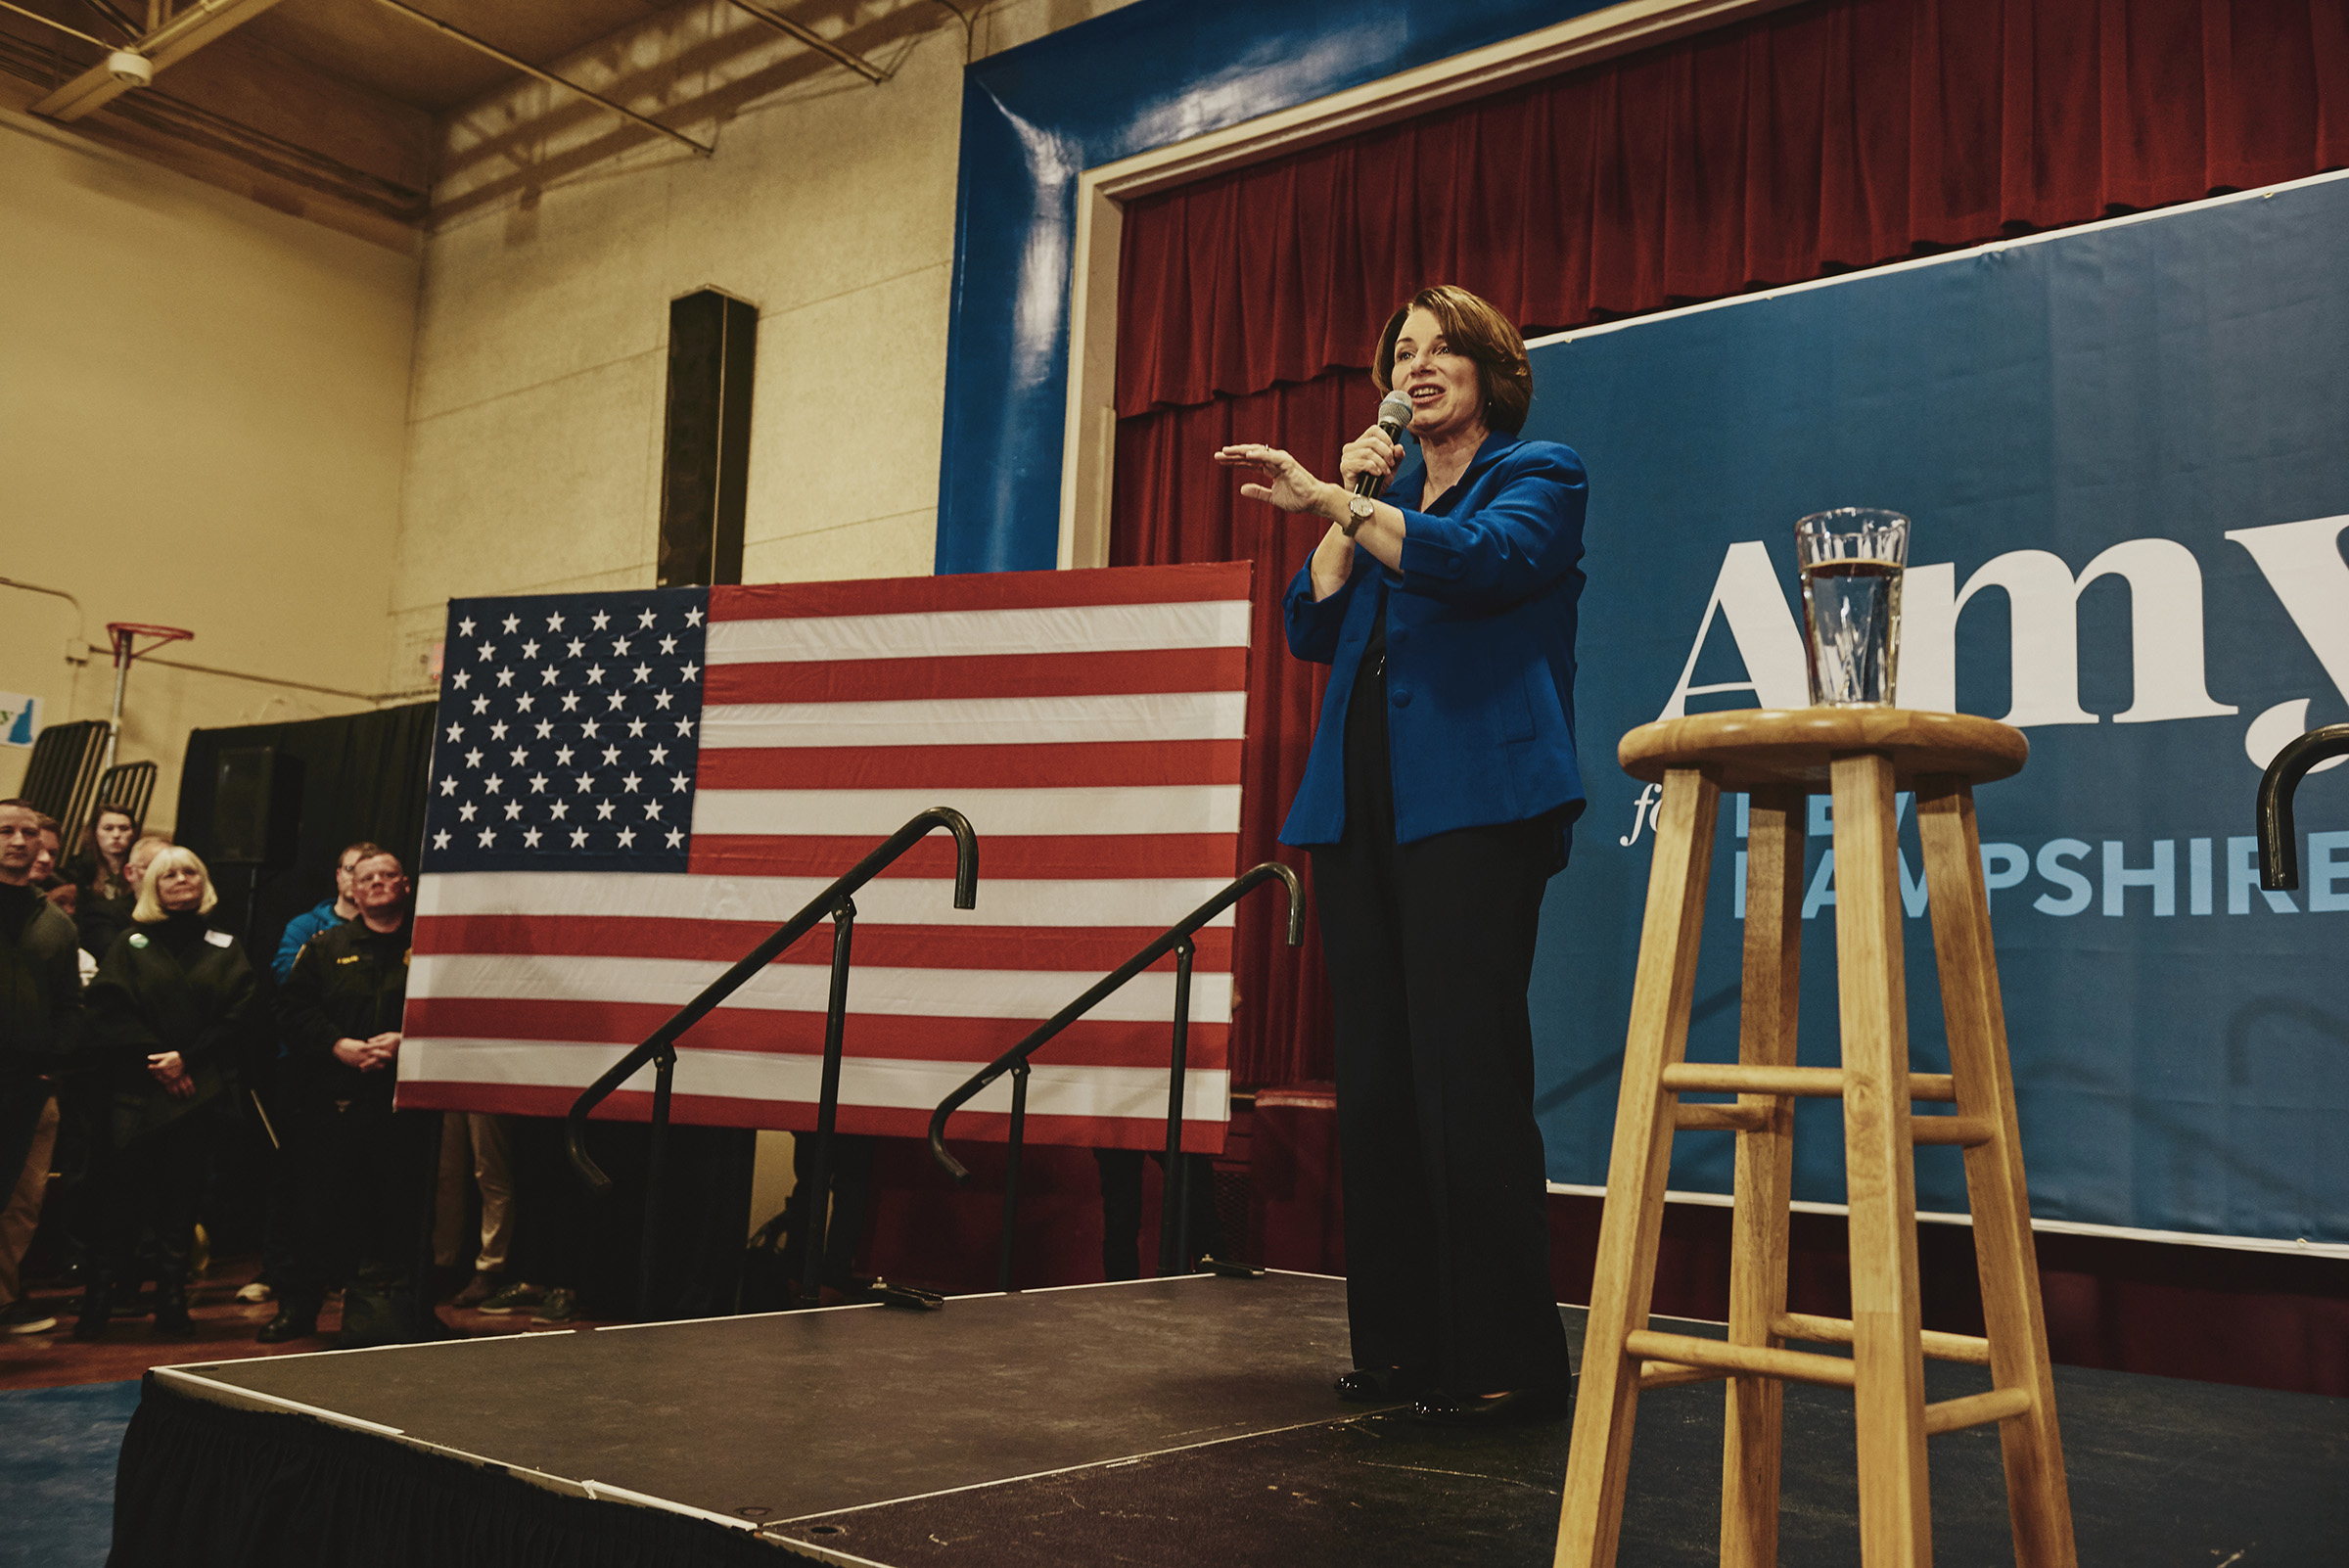 Sen. Amy Klobuchar speaks at her Salem GOTV event at the Woodbury School in Salem, N.H. on Feb. 9, 2020. (Tony Luong for TIME)